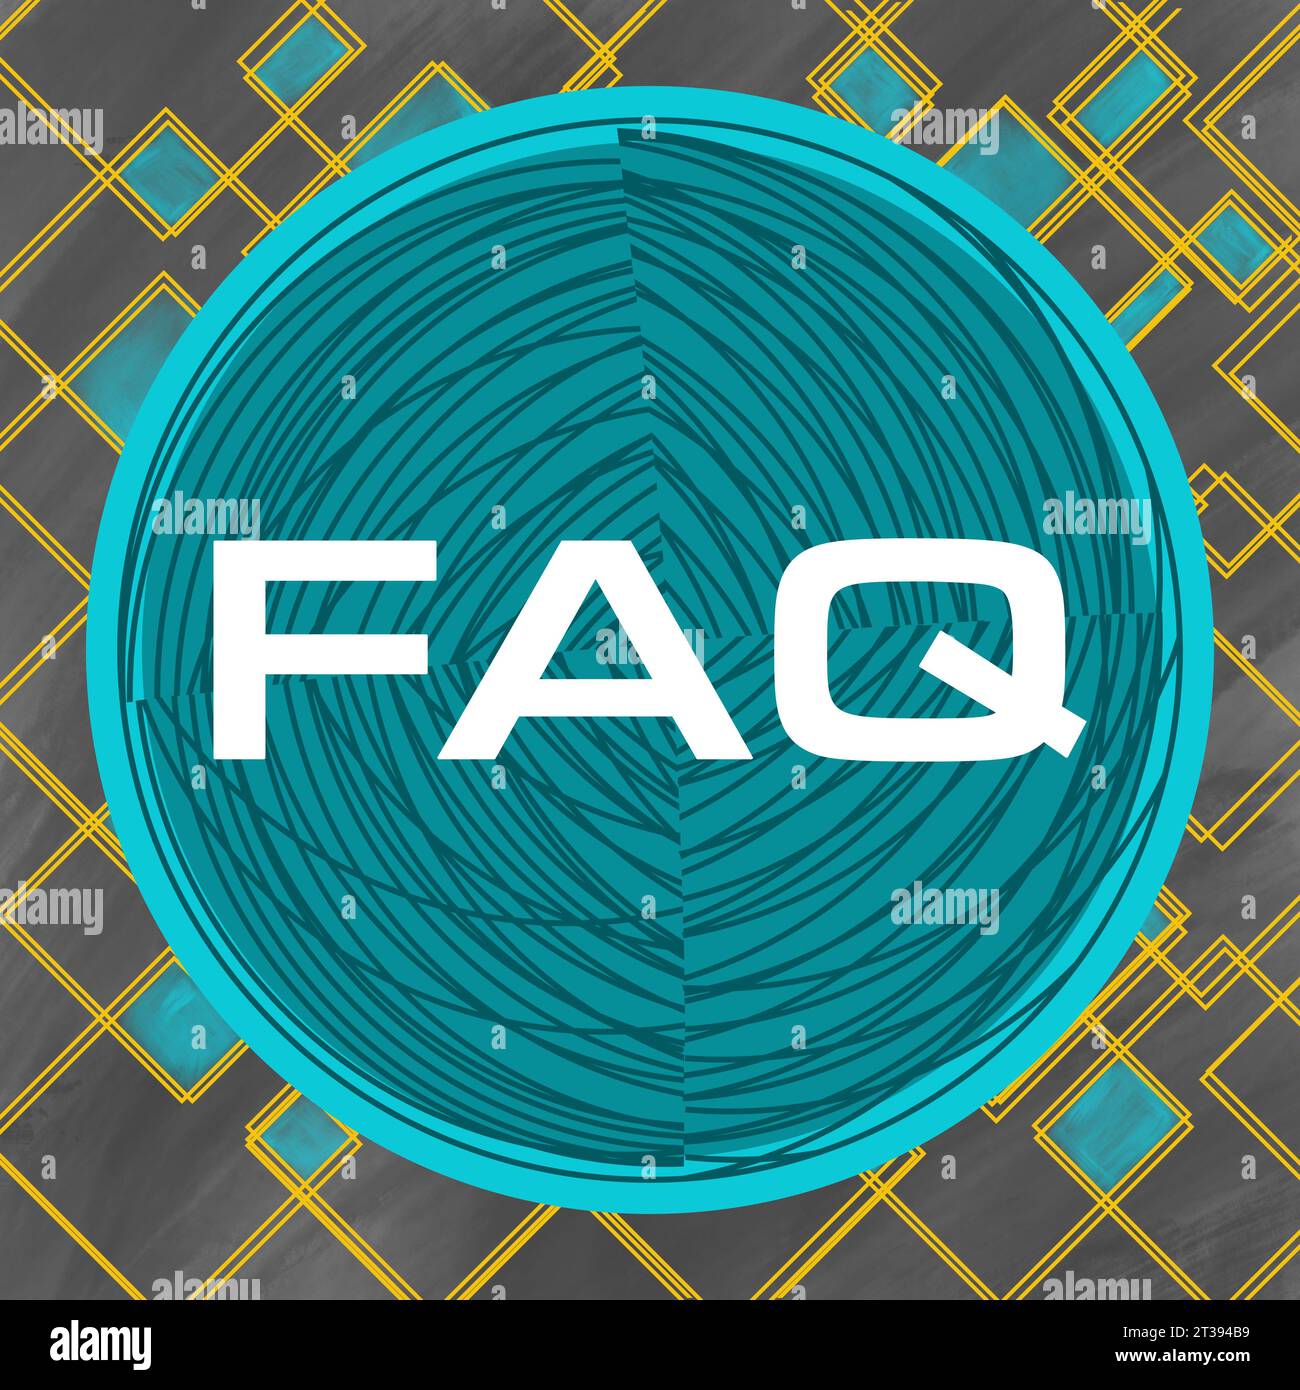 FAQ - Frequently Asked Questions Turquoise Dark Gold Squares Lines Grid Circular Text Stock Photo